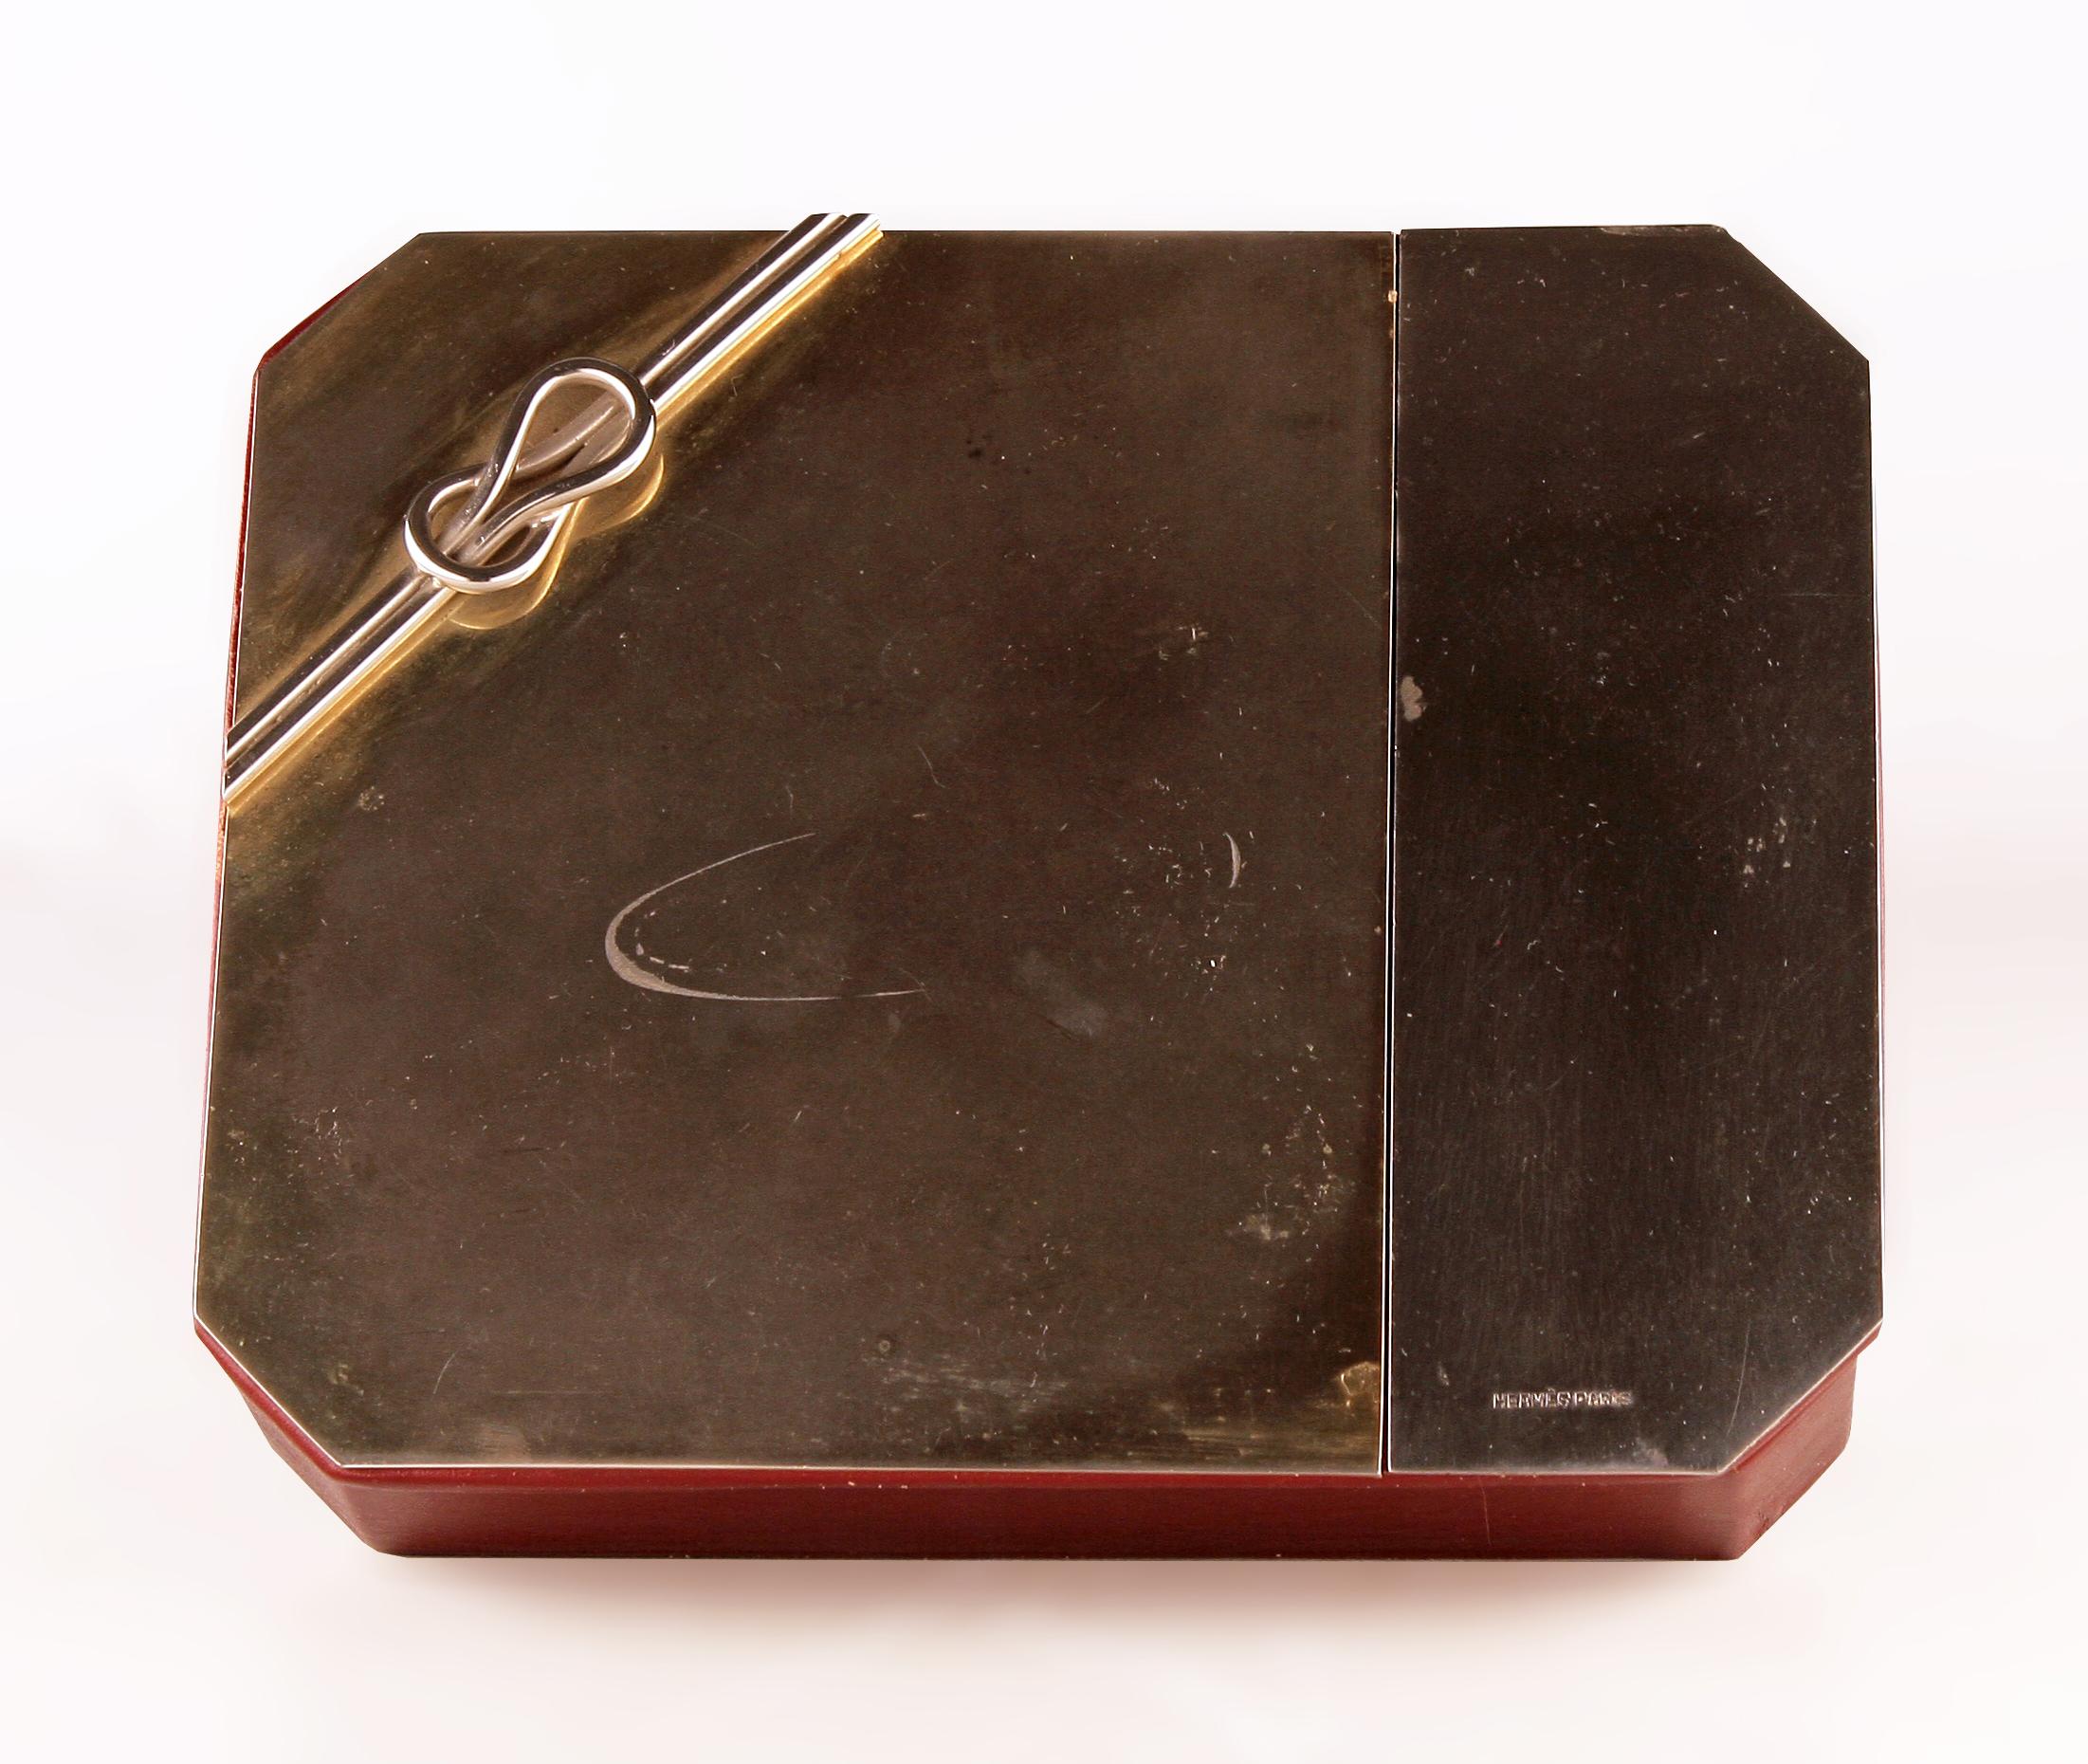 Silvered Mid-20th Century Wooden Box with Silver Knot Lid by the French Firm Hermès Paris For Sale